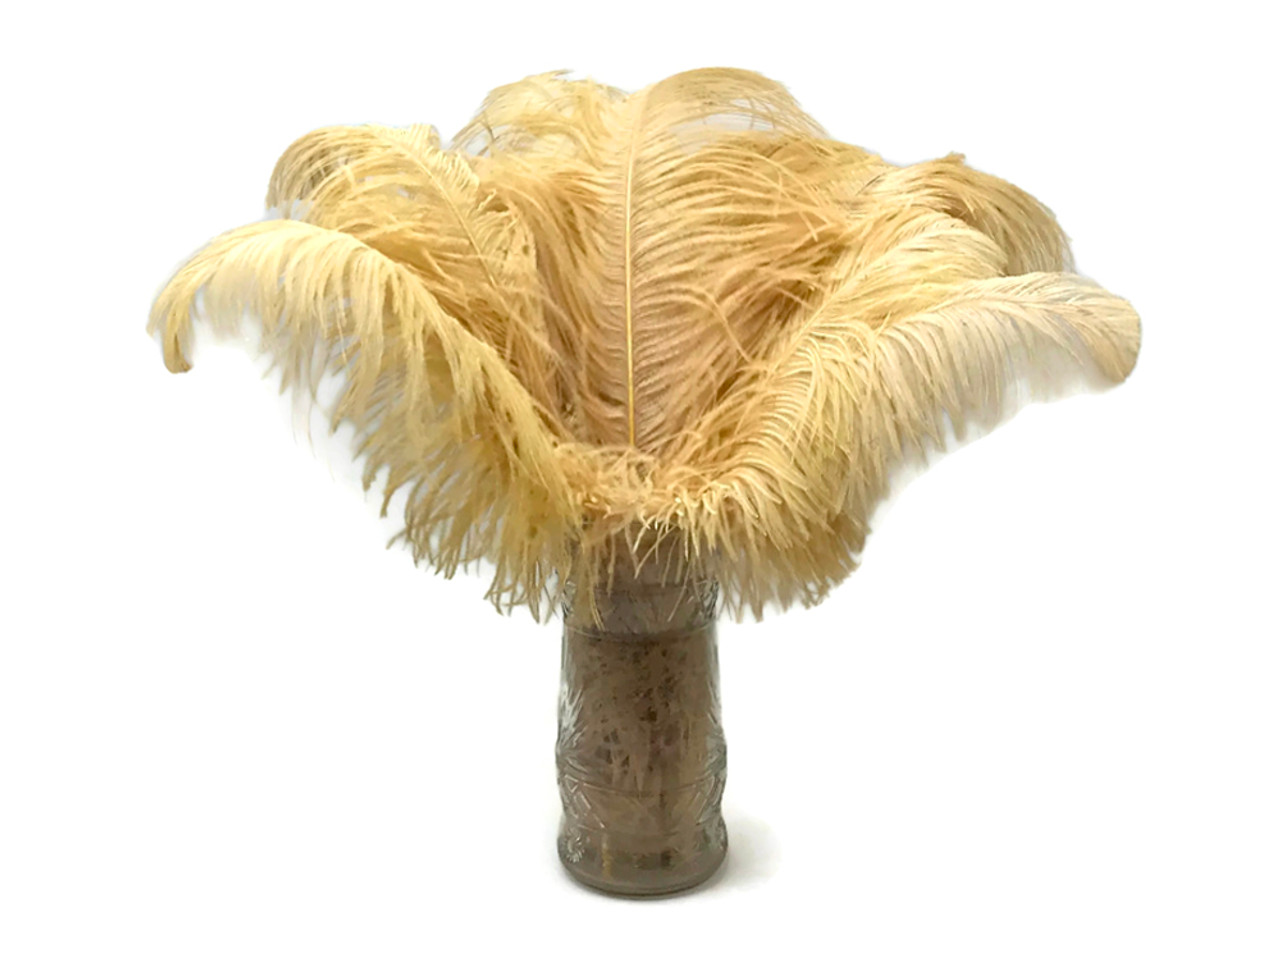 1/2 Lb. - 18-24 Old Gold Large Ostrich Wing Plume Wholesale Feathers (Bulk)